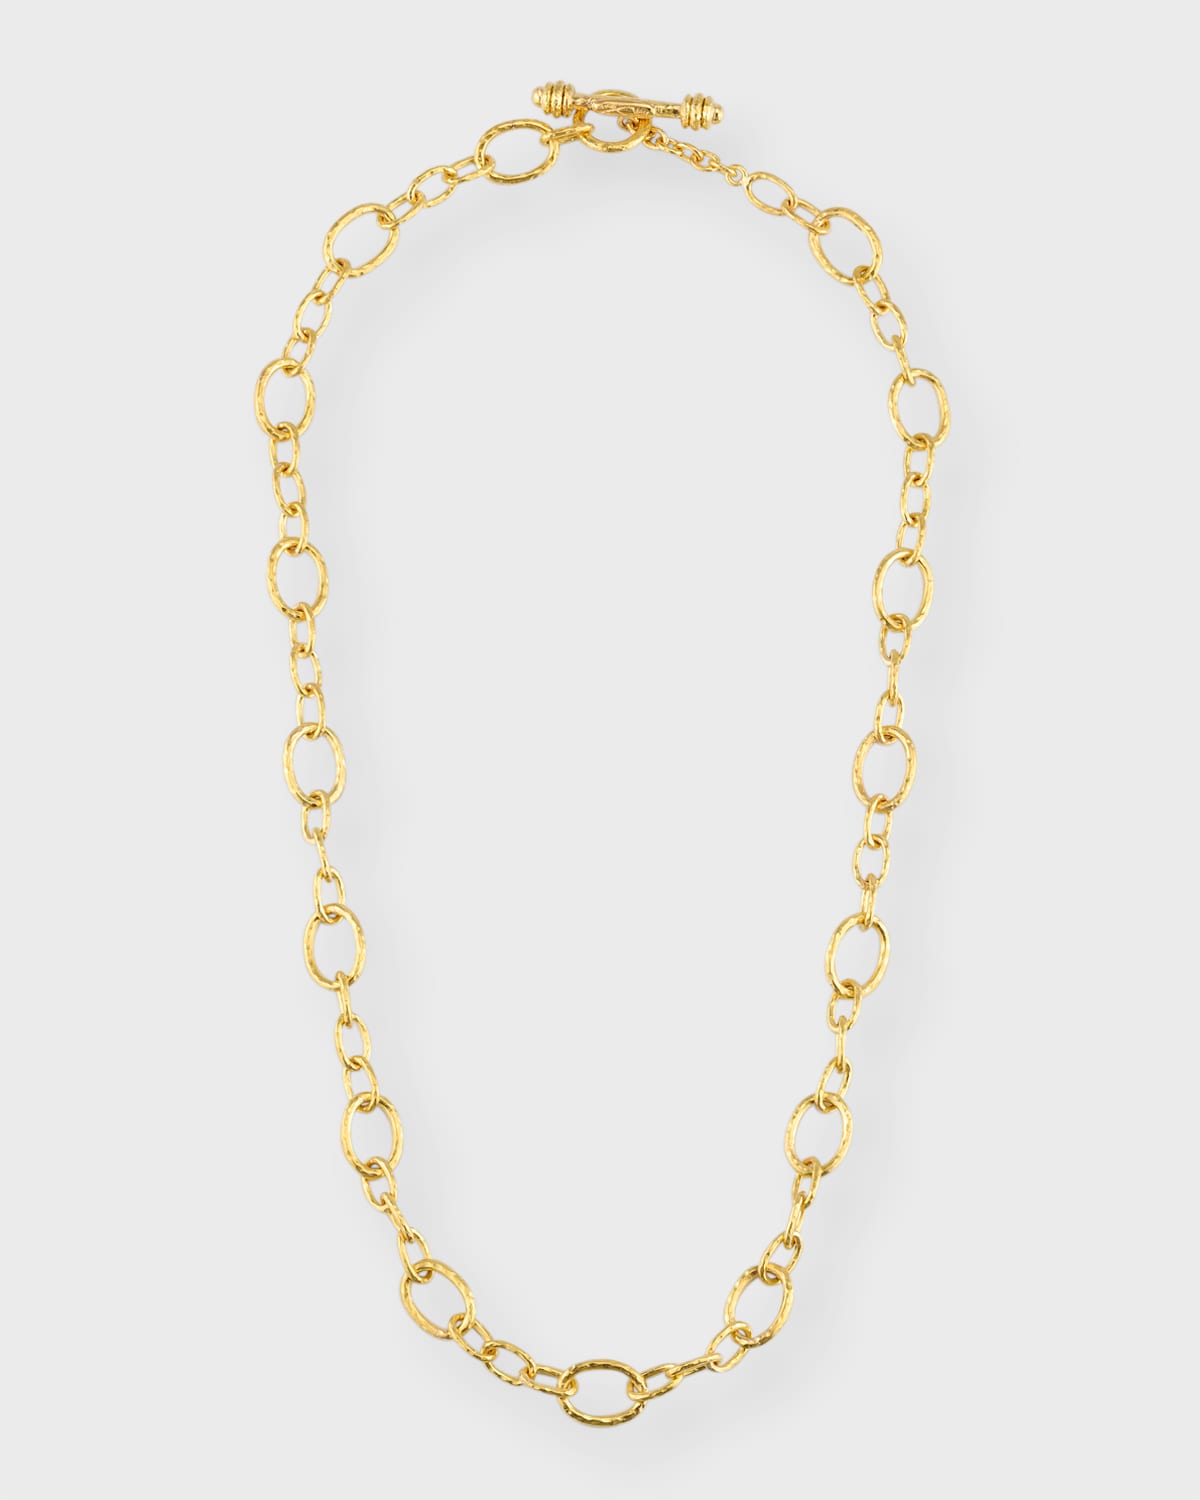 19k Yellow Gold Small Garda Link Necklace